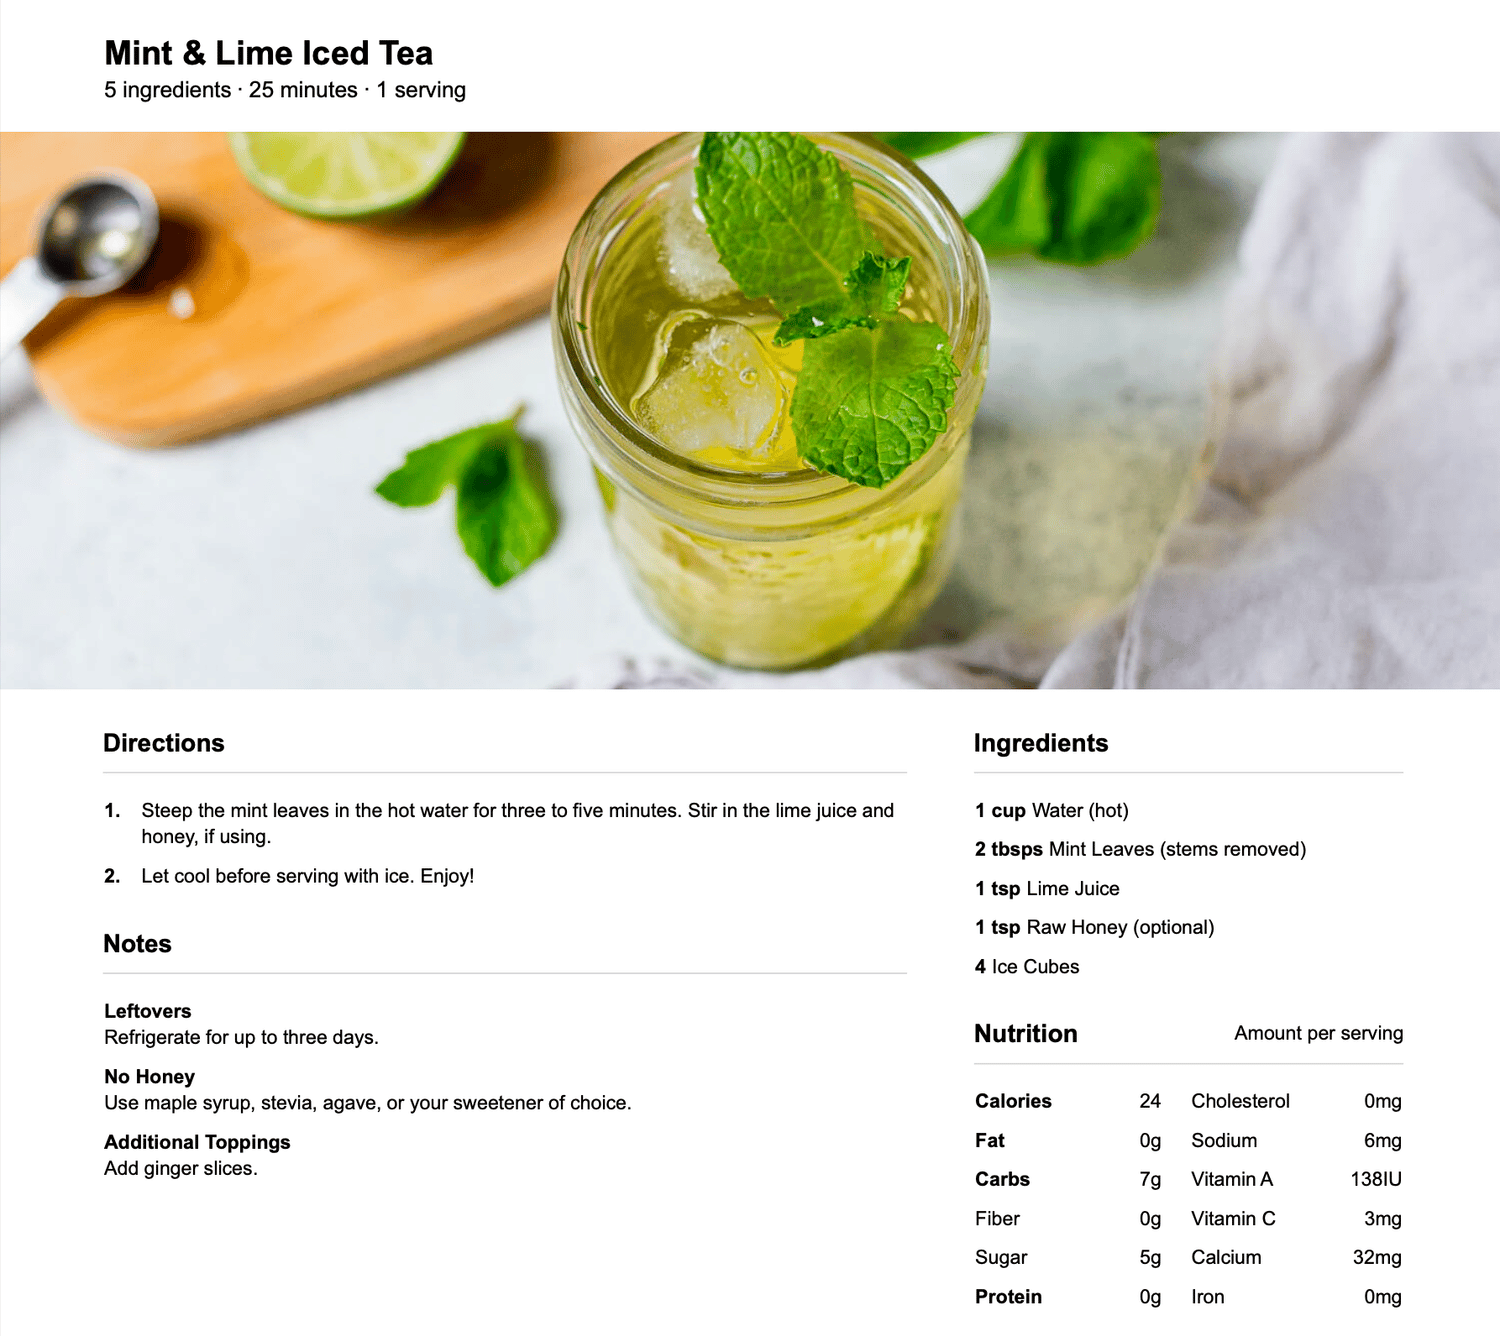 Mint & lime iced tea diet recipe loss weight